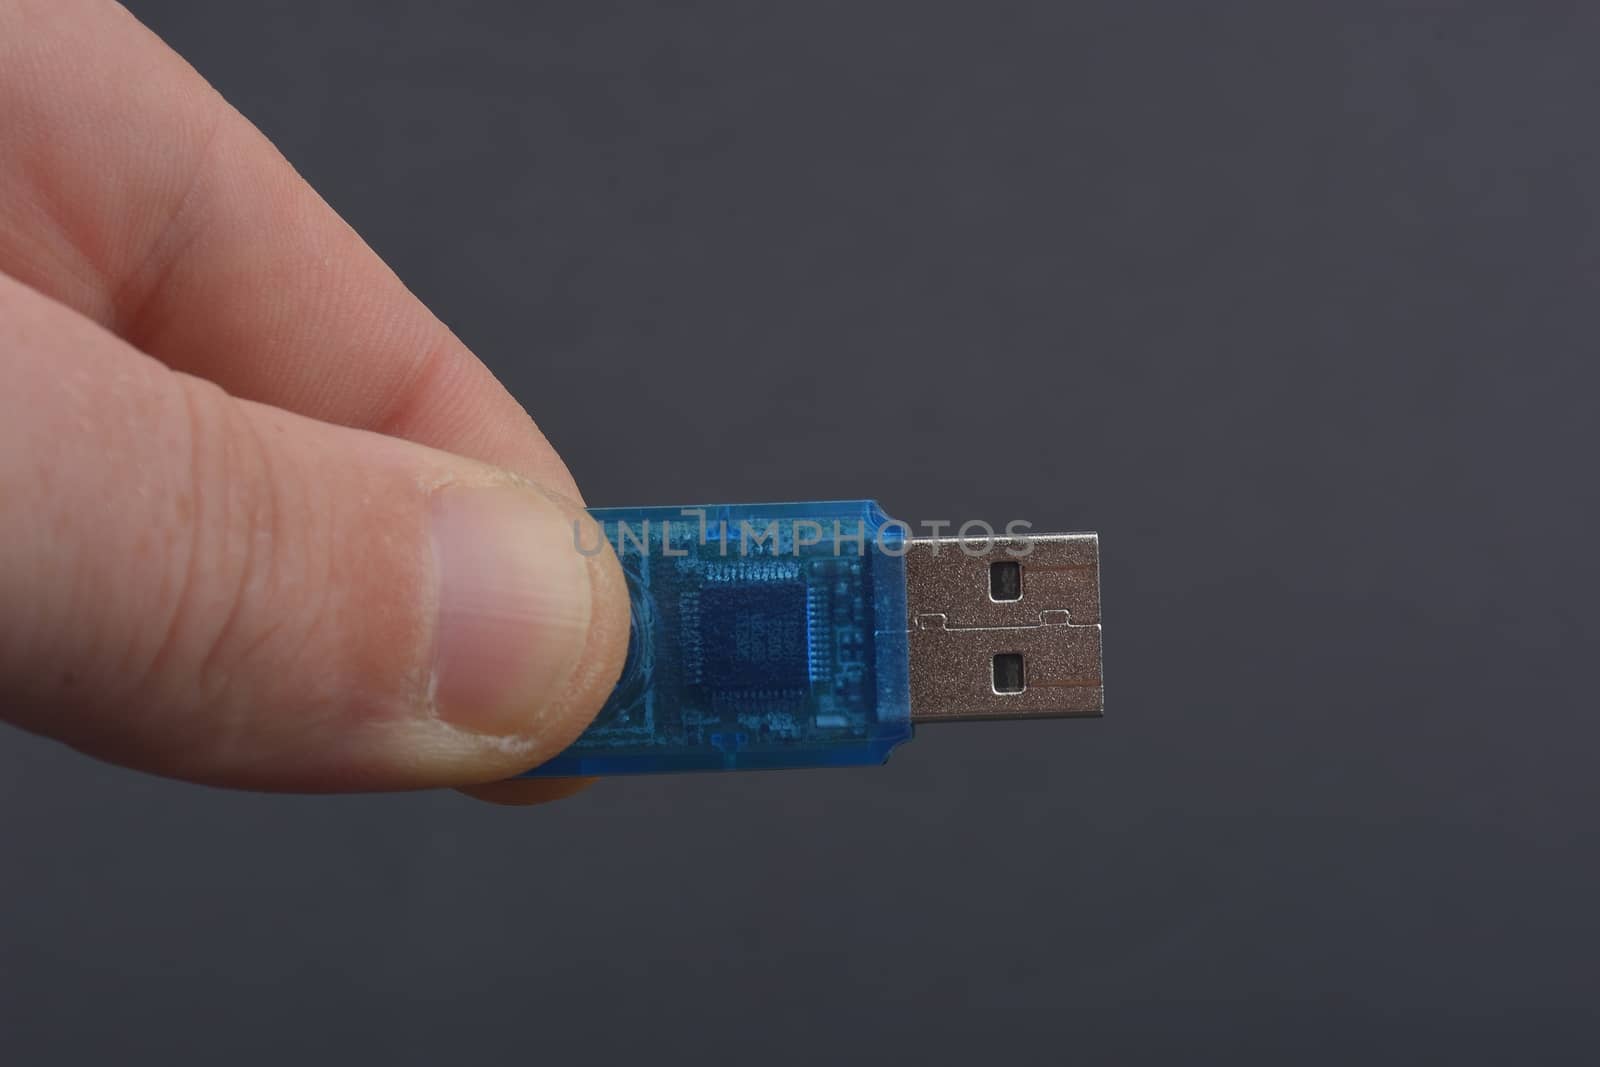 USB memory stick by constantinhurghea